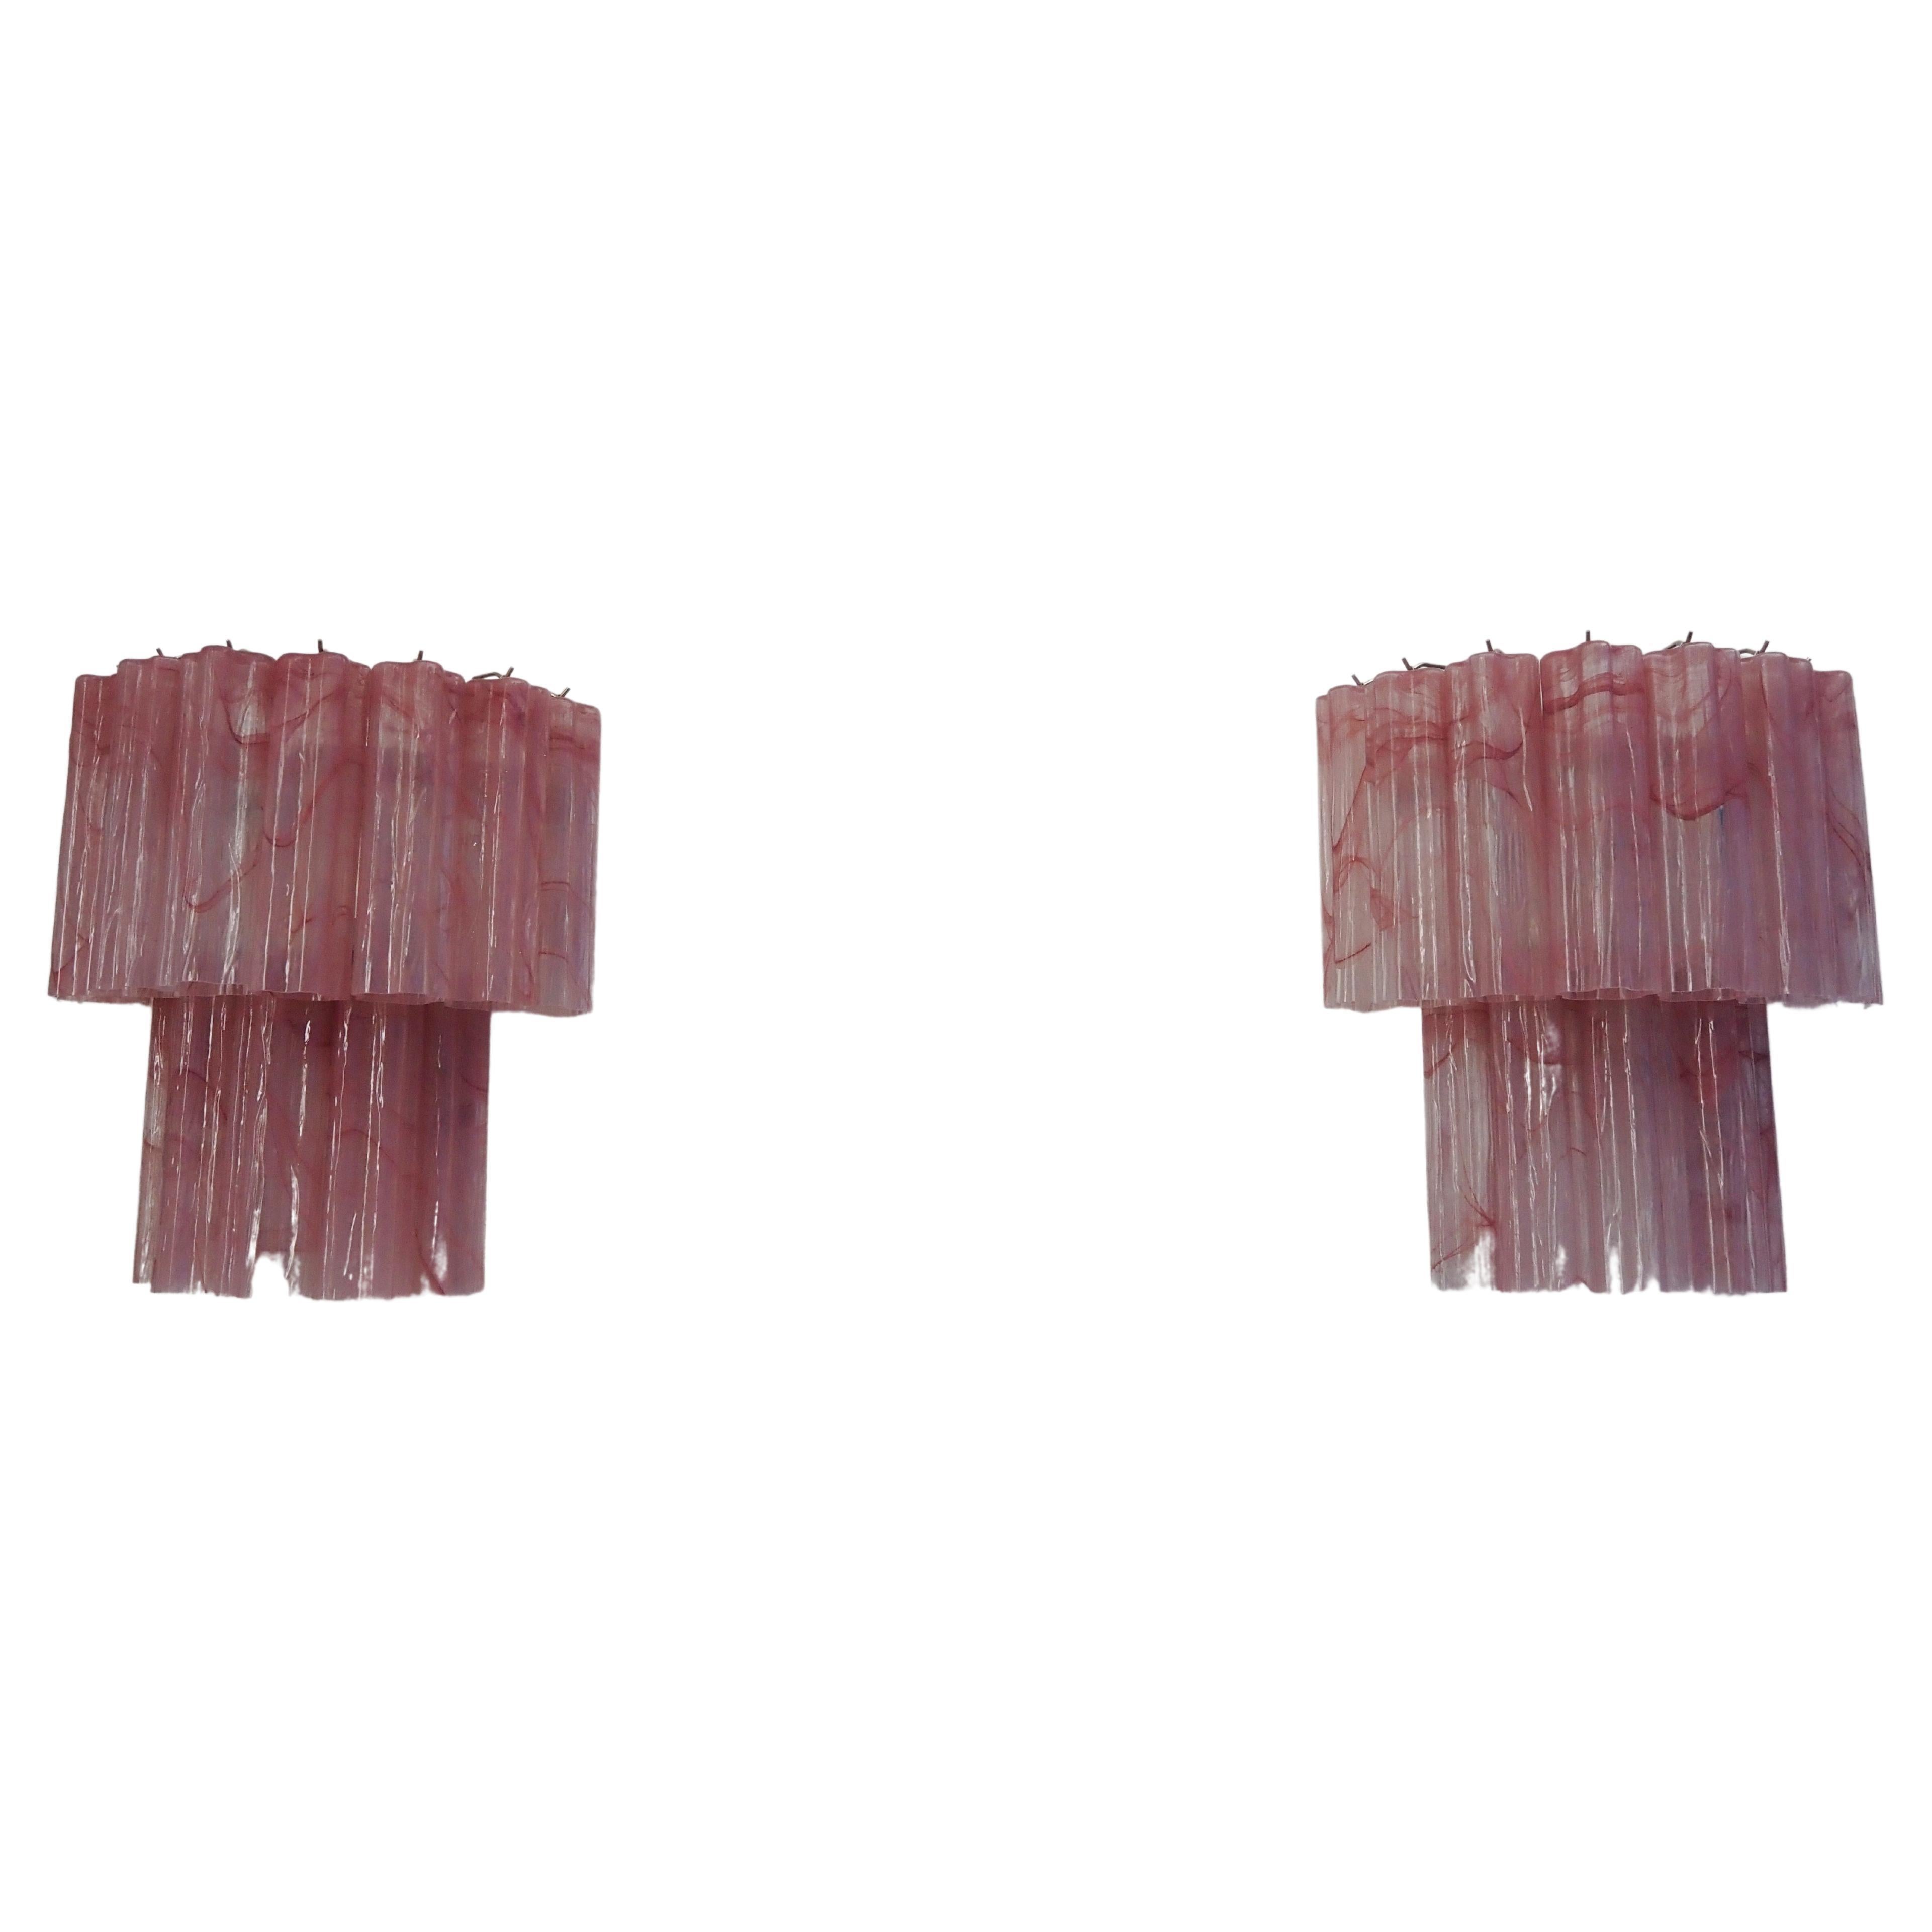 Fantastic Pair of Murano Glass Tube Wall Sconces - 13 Pink Alabster Glass Tube